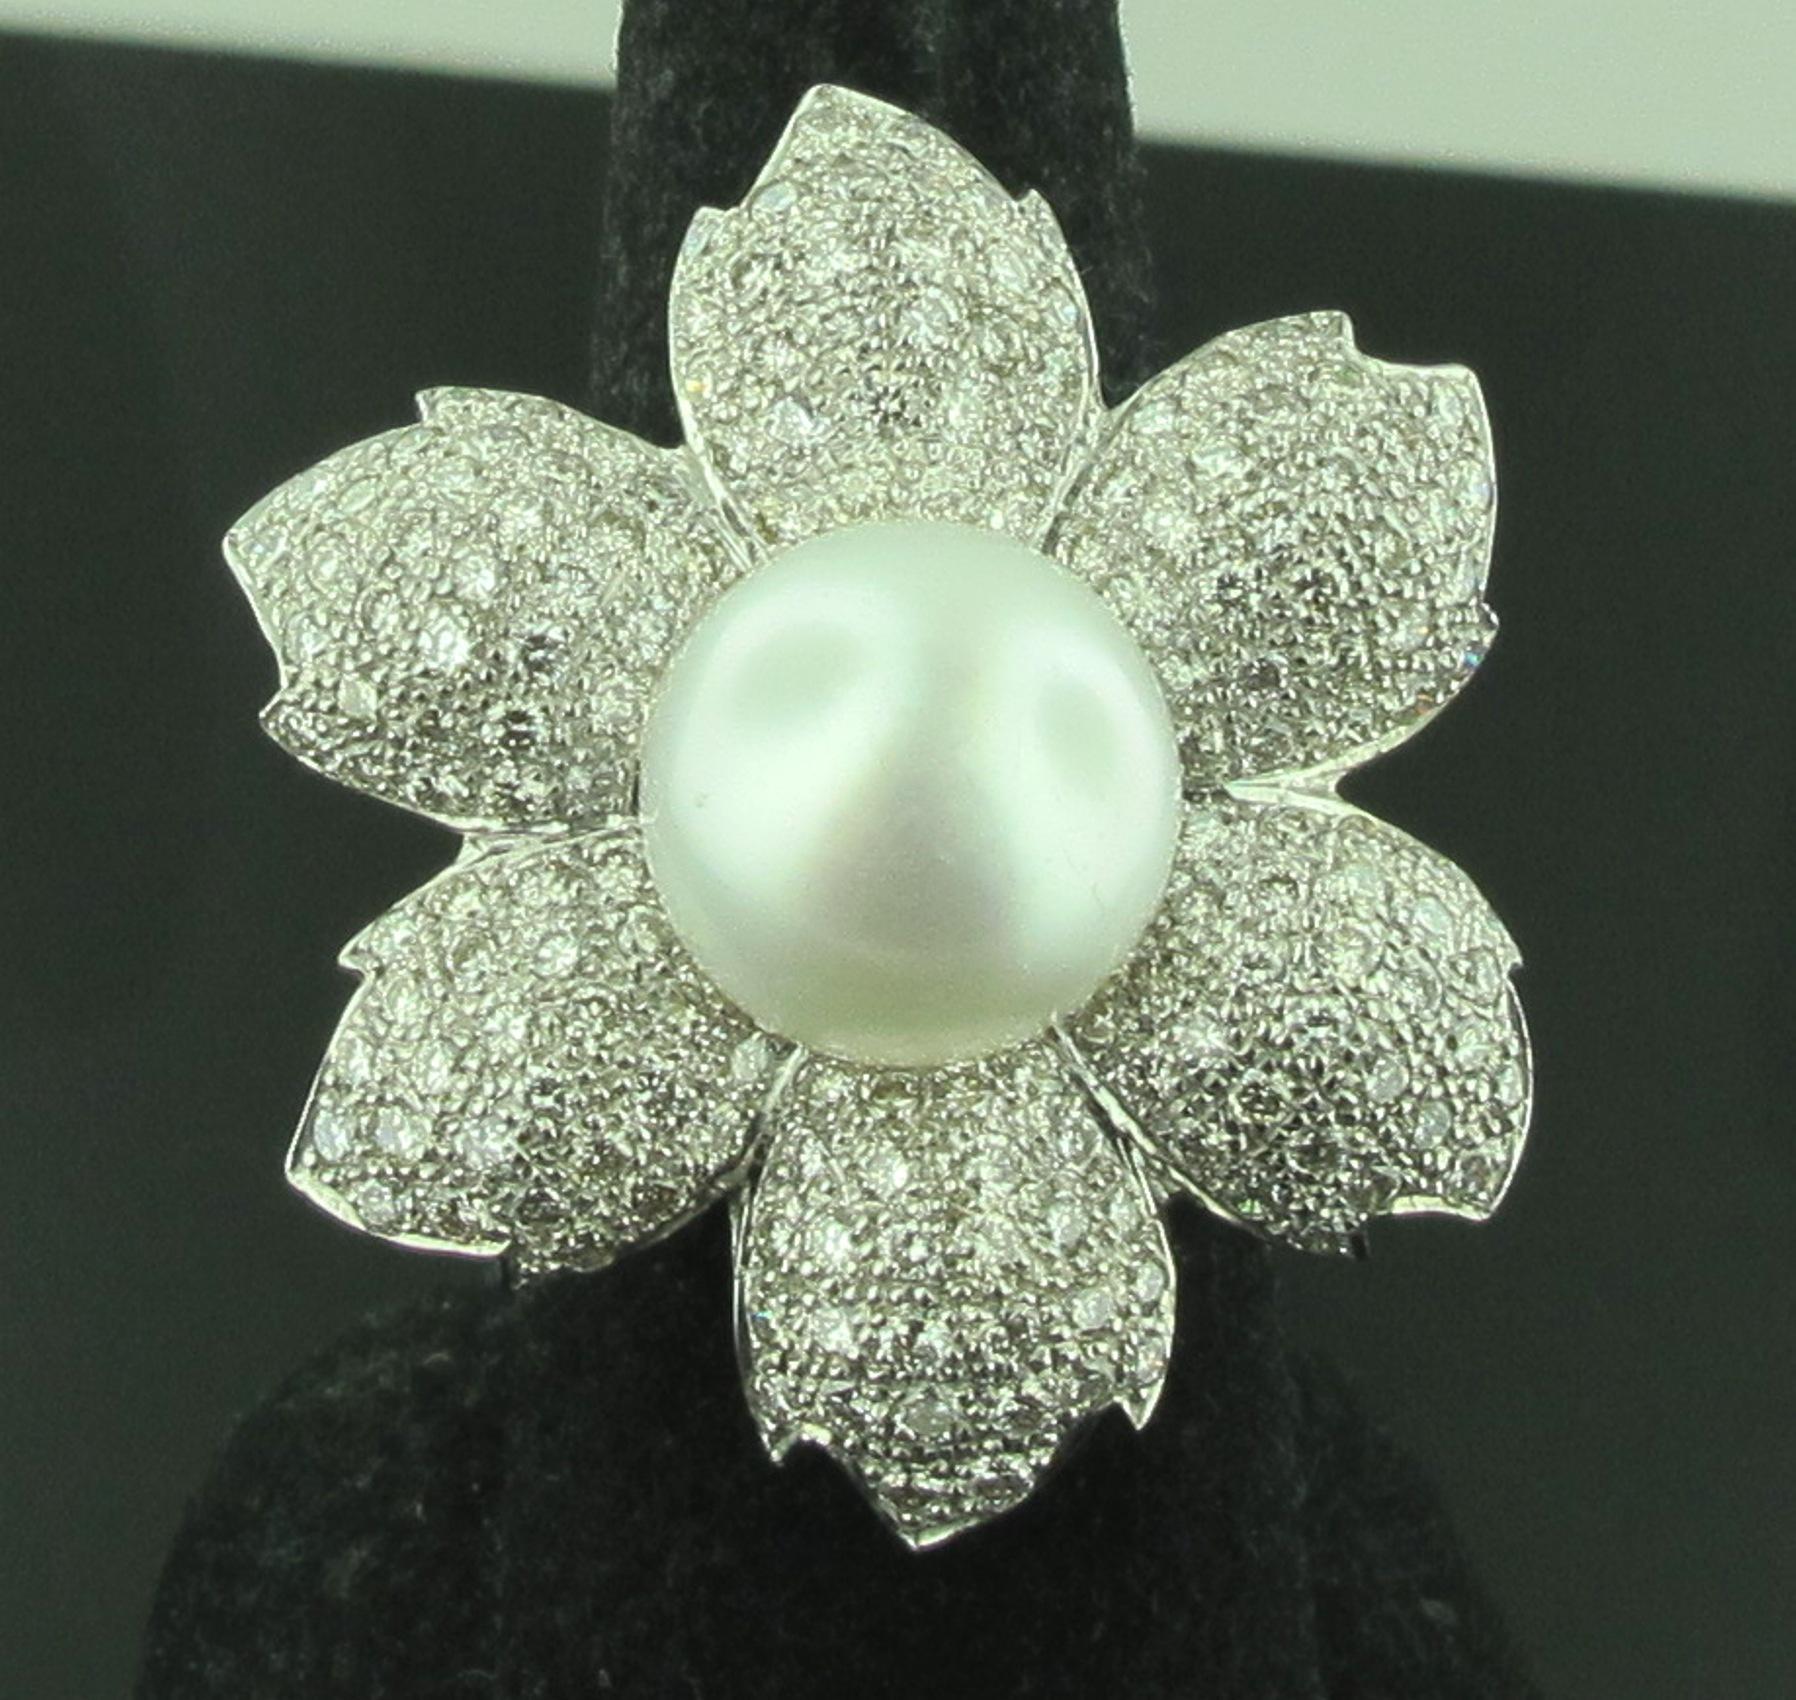 Set in 18 karat white gold is a 12.50 mm White South Sea Pearl with 6 'petals' surrounding it in a flower design.  The petals consist of 173 round brilliant cut diamonds with a total diamond weight of 3.50 carats.  Ring size is 7.